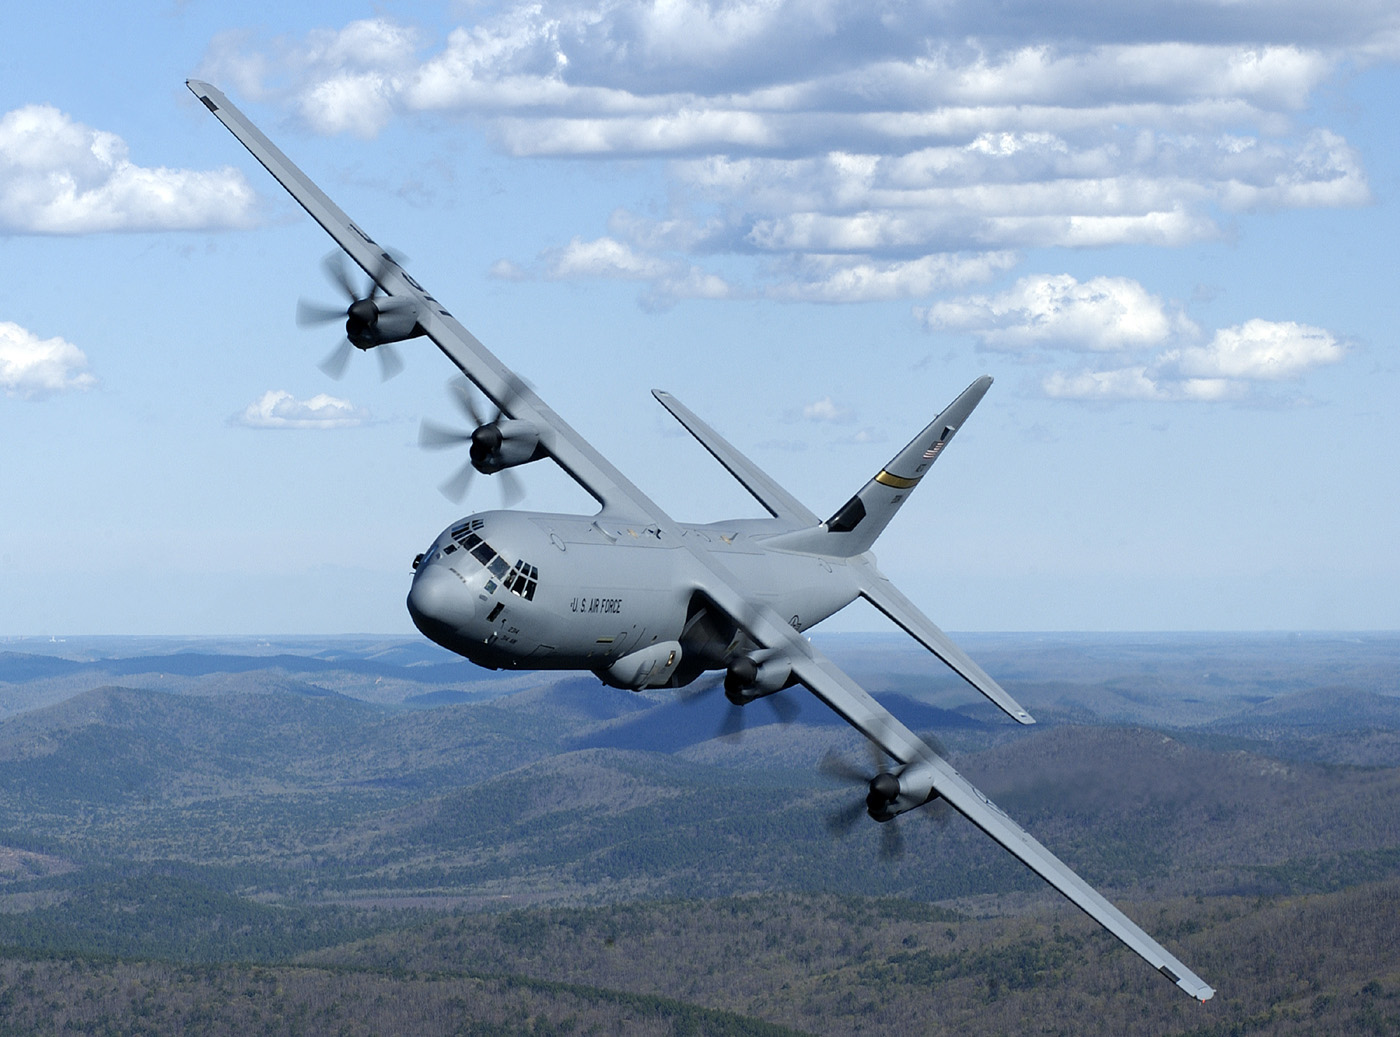 Lockheed Martin has sold India 6 Super Hercules tactical Airlifter; C-130J aircraft, with an option to sell 6 more. The C-130J is a very advanced version with four powerful Allison AE2100D3 turboprop engines; Northrop Grummans MODAR 4,000-colour weather and navigation radar, with range of 250 nautical miles & four L-3 display systems multifunction liquid crystal display glass cockpit. The cargo capacity is over 15 tons.